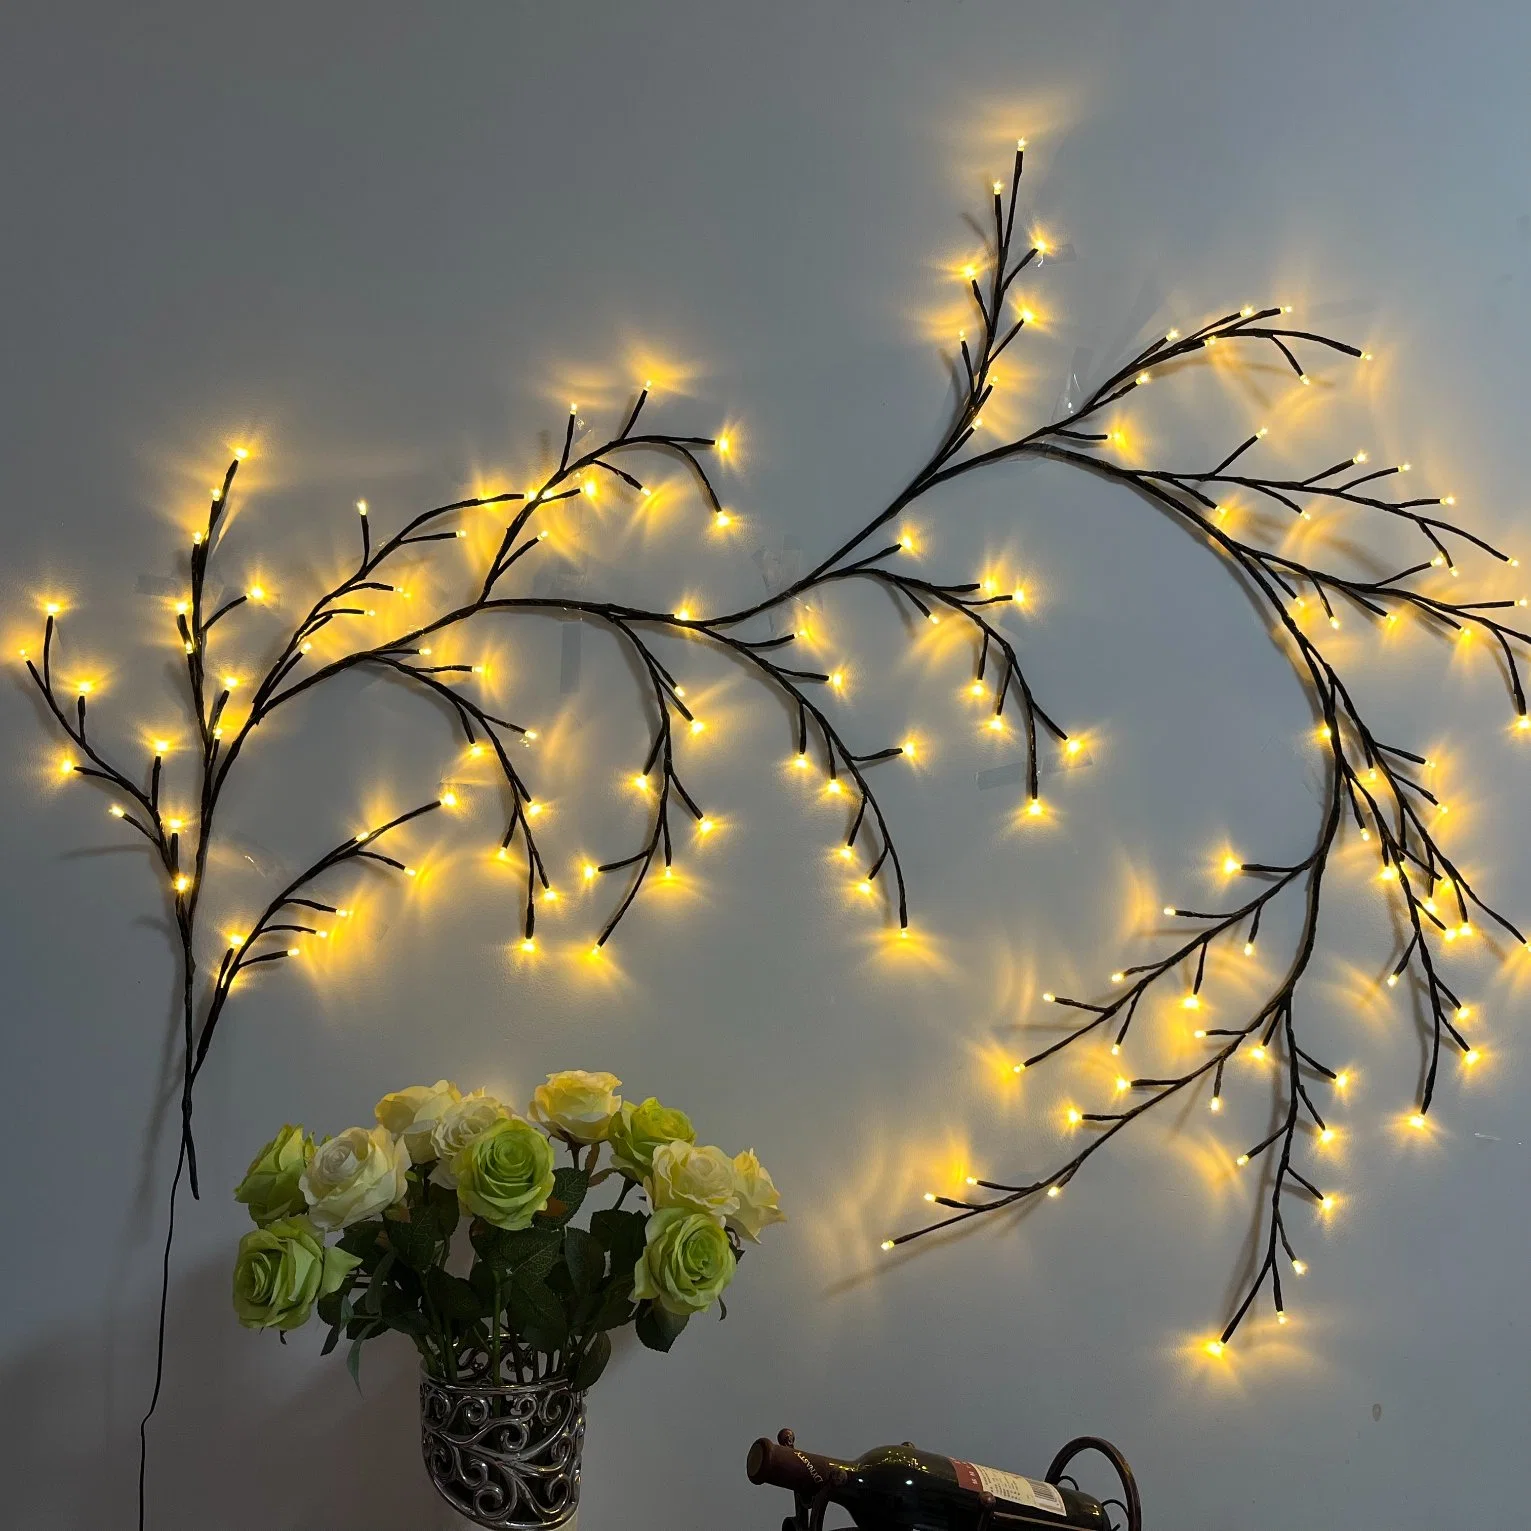 LED String Light for Christmas Garden Decoration and More